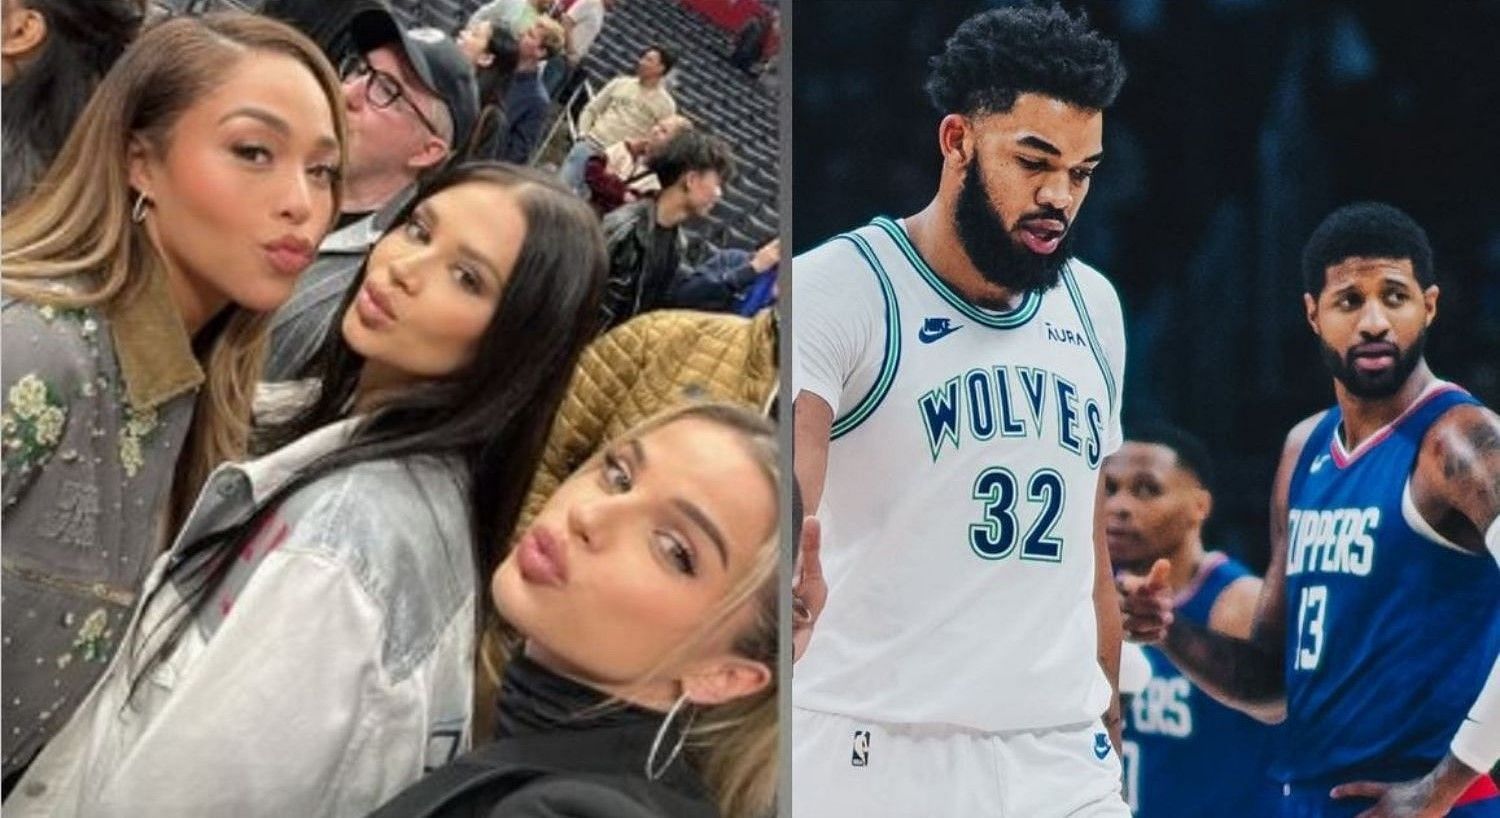 A fashionably dressed Jordyn Woods (leftmost) watched her boyfriend Karl-Anthony Towns beat Paul George and the LA Clippers on Monday.